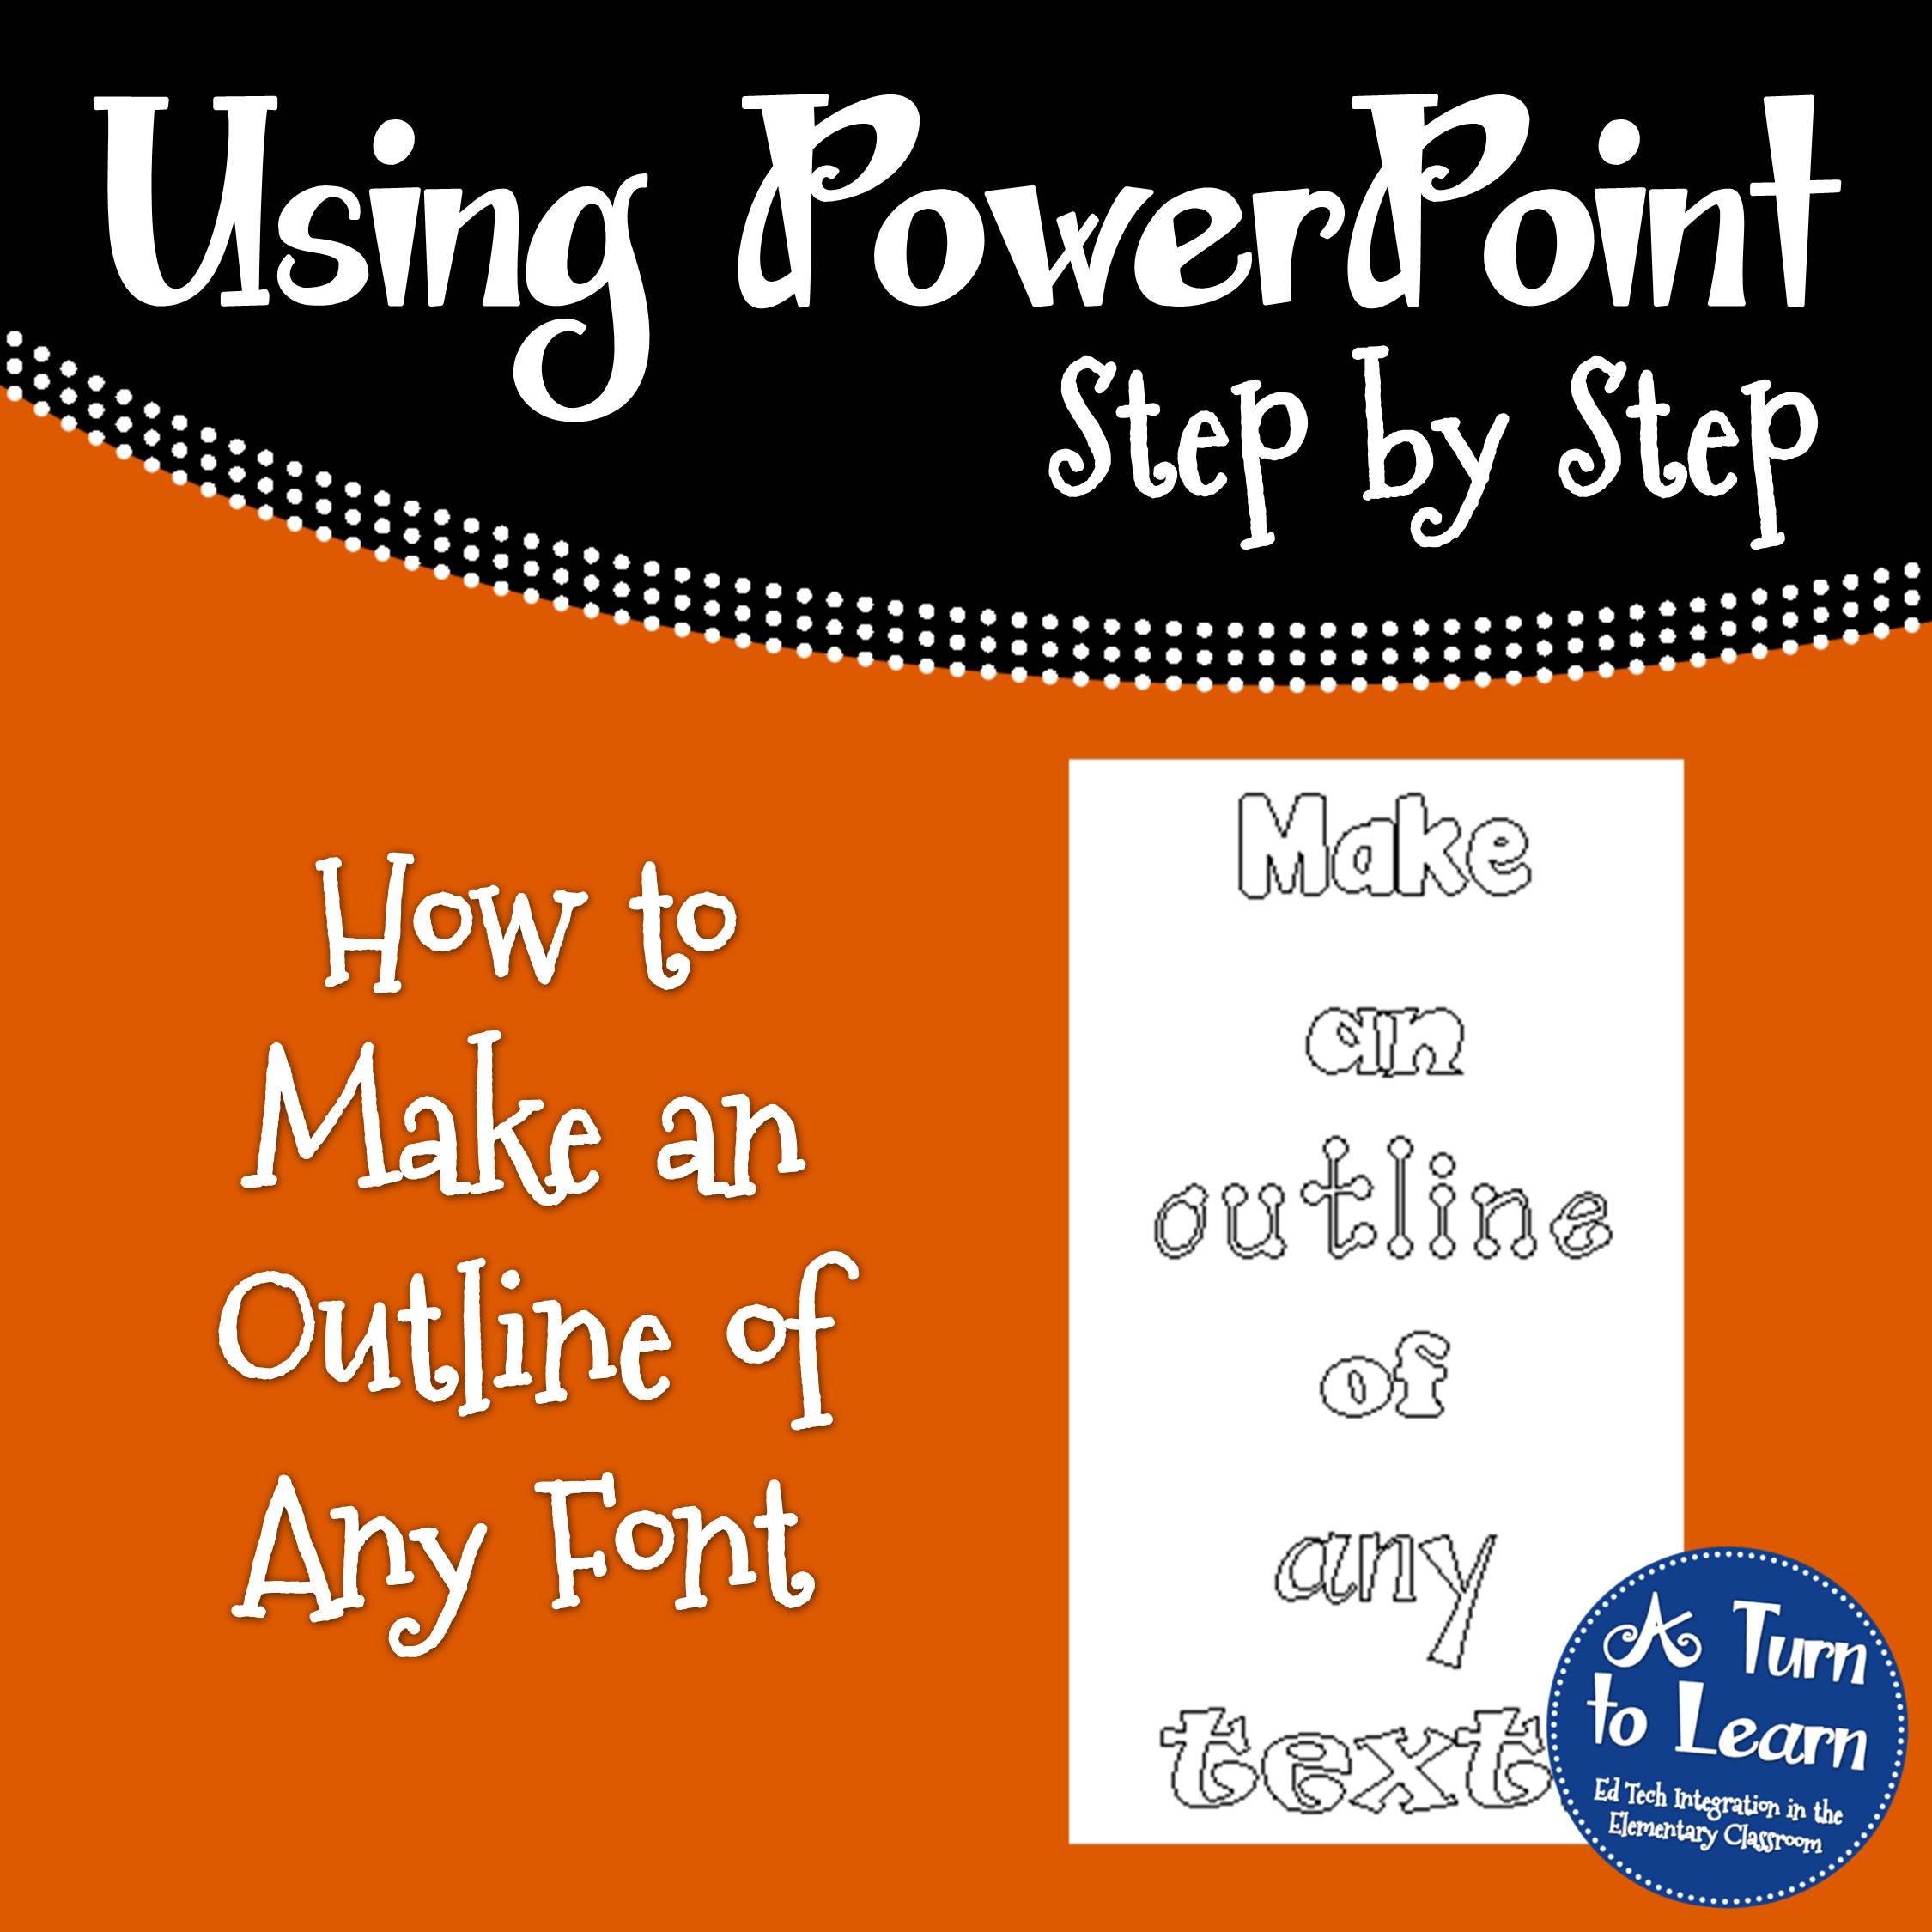 How to Make an Outline of Any Font